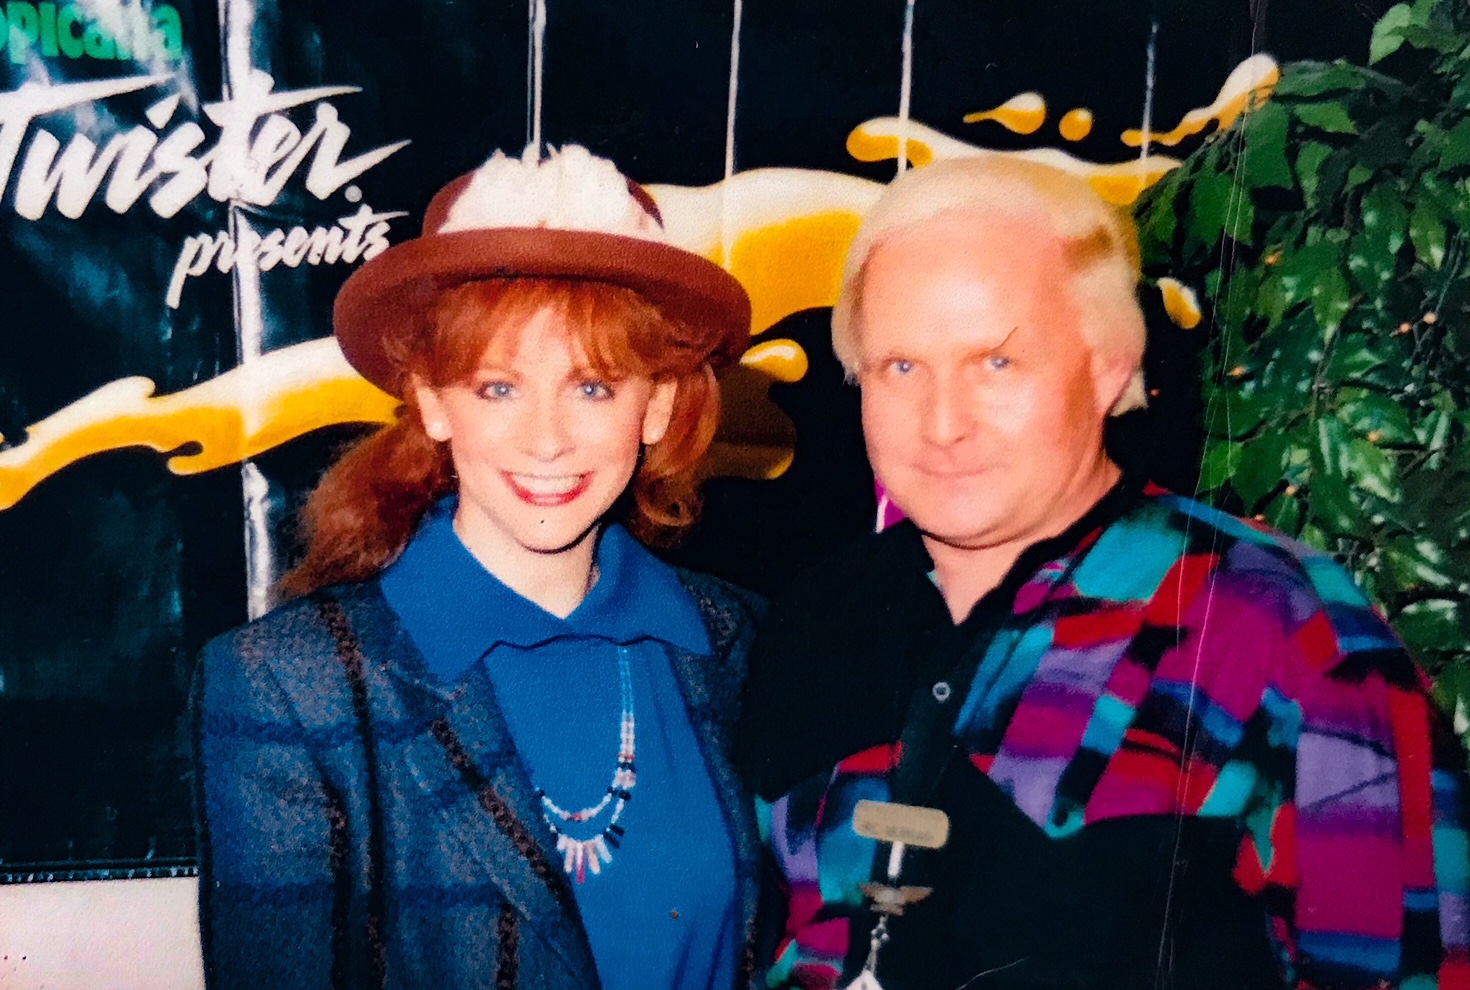 Ric Morgan (R) poses with Reba McEntire at a concert in 1994. Morgan says he was McEntire’s touring caterer for 10 years. (submitted by Ric Morgan)